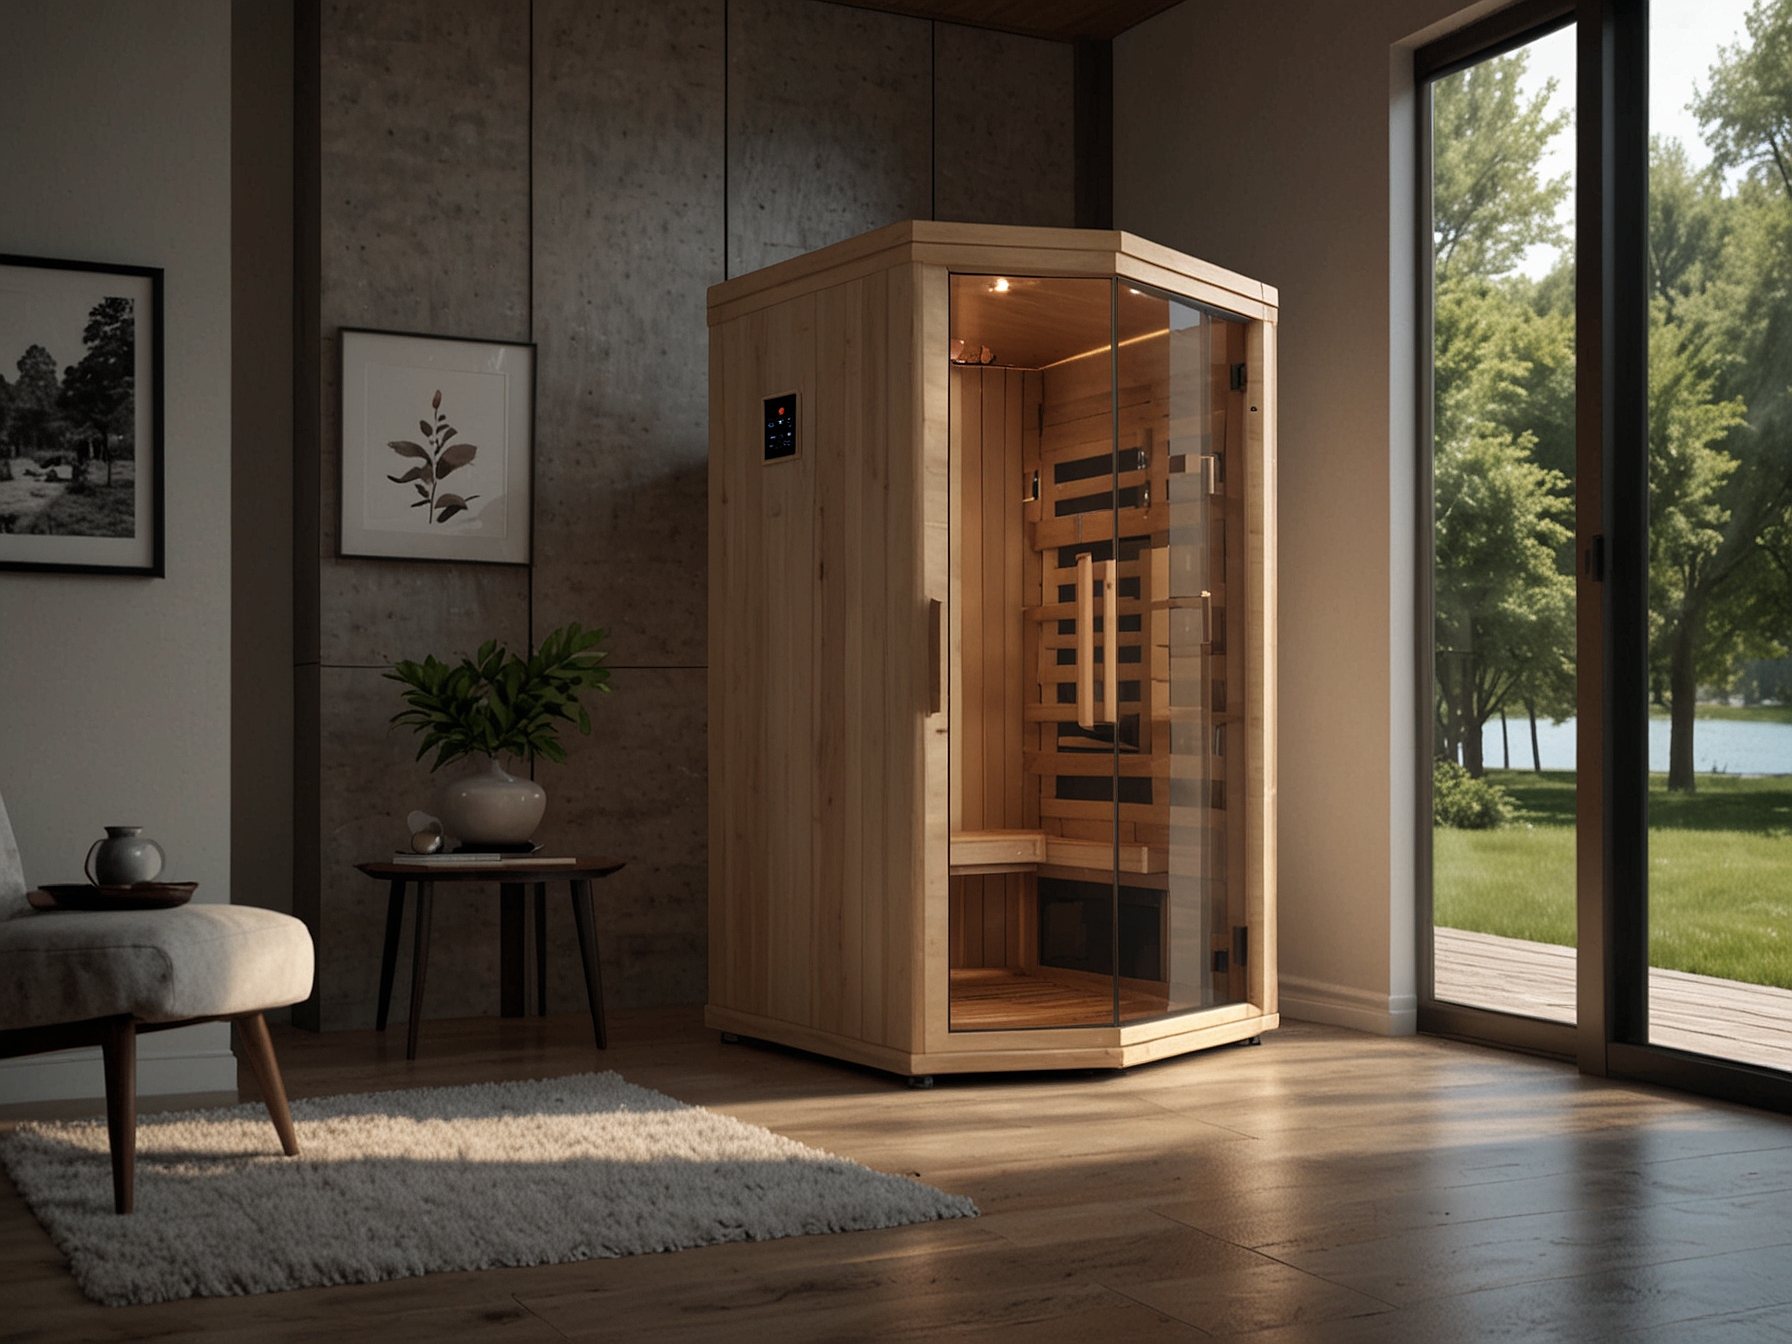 A modern home interior featuring the Sunlighten Solo System portable infrared sauna, highlighting its sleek design and compact size, suitable for small spaces and mobility.